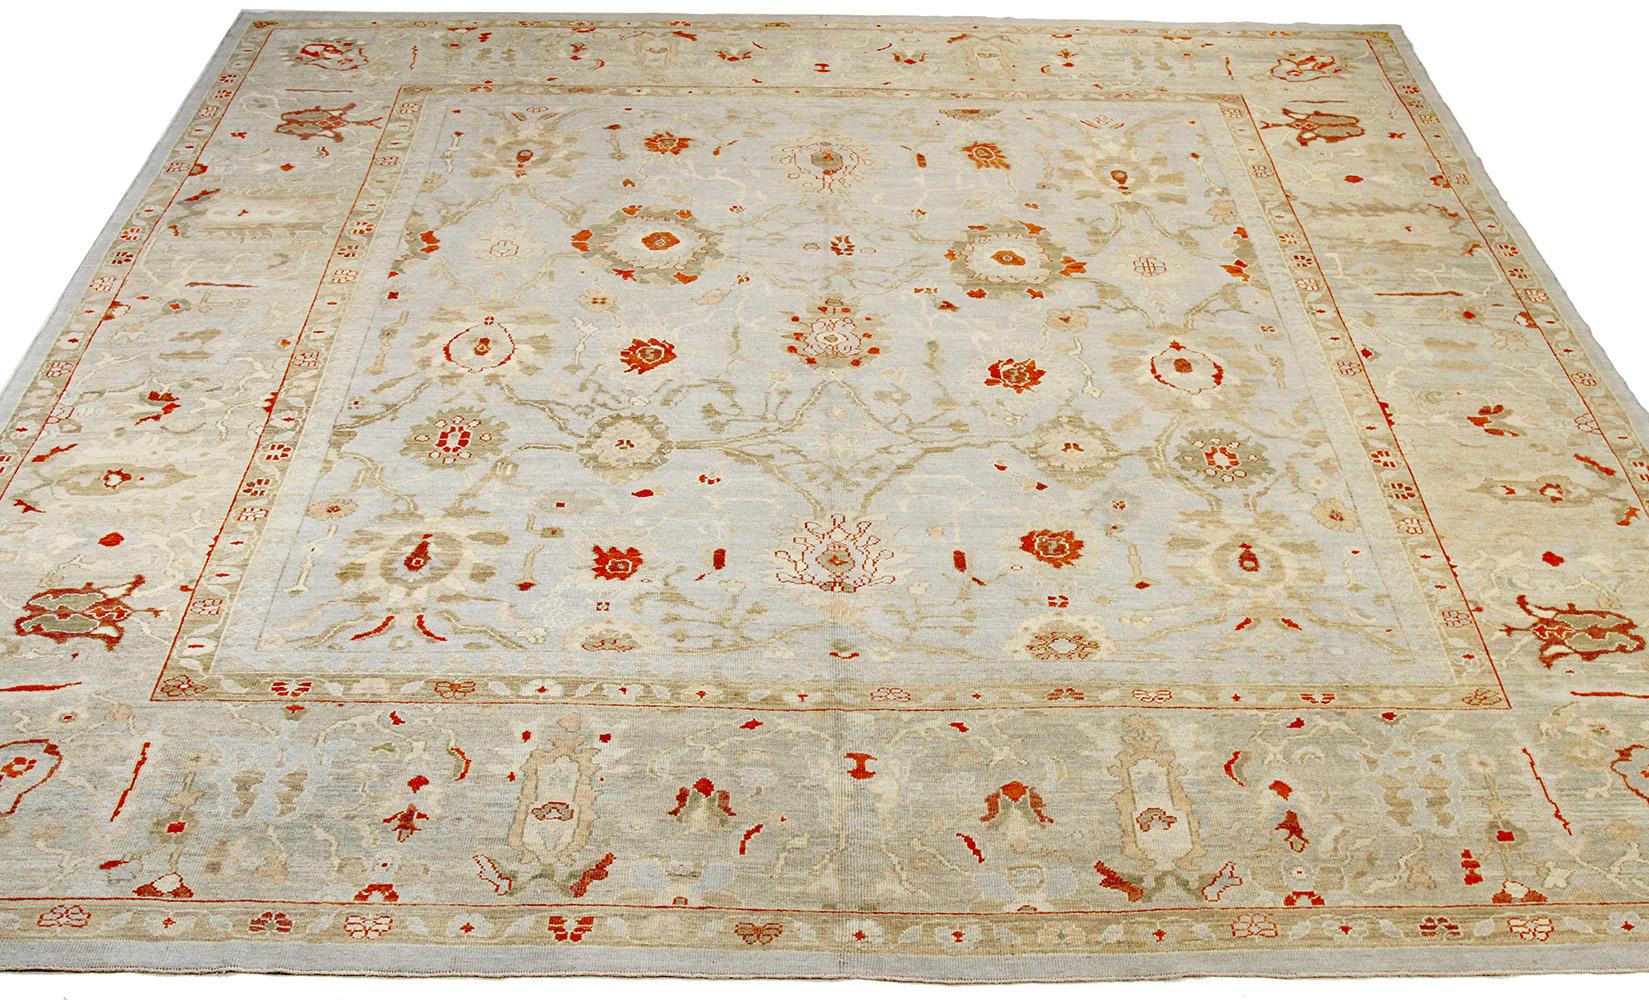 New Persian rug made of handwoven sheep’s wool of the finest quality. It’s colored with organic vegetable dyes that are certified safe for humans and pets alike. It features rows of flower medallion details all-over associated with Oushak weaving